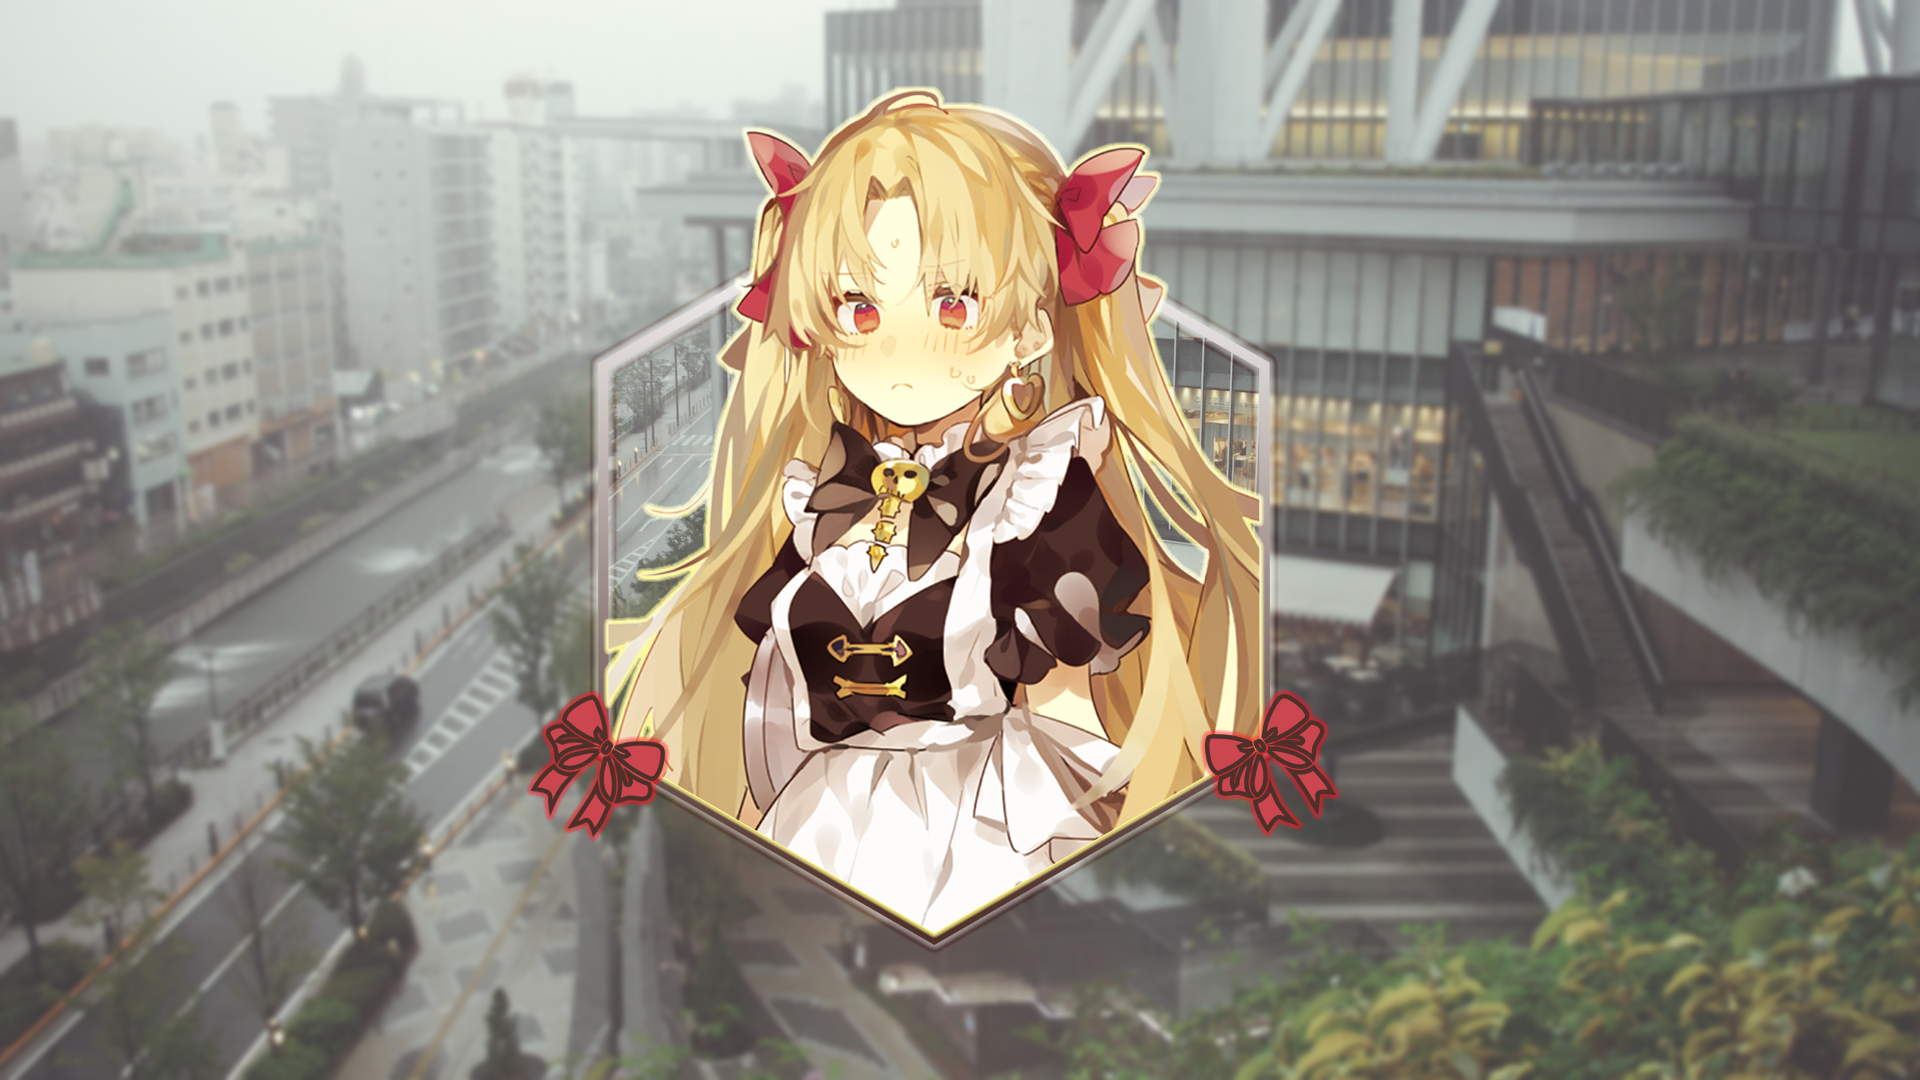 Anime 1920x1080 Fate series Ereshkigal (Fate/Grand Order) picture-in-picture anime girls Tokyo